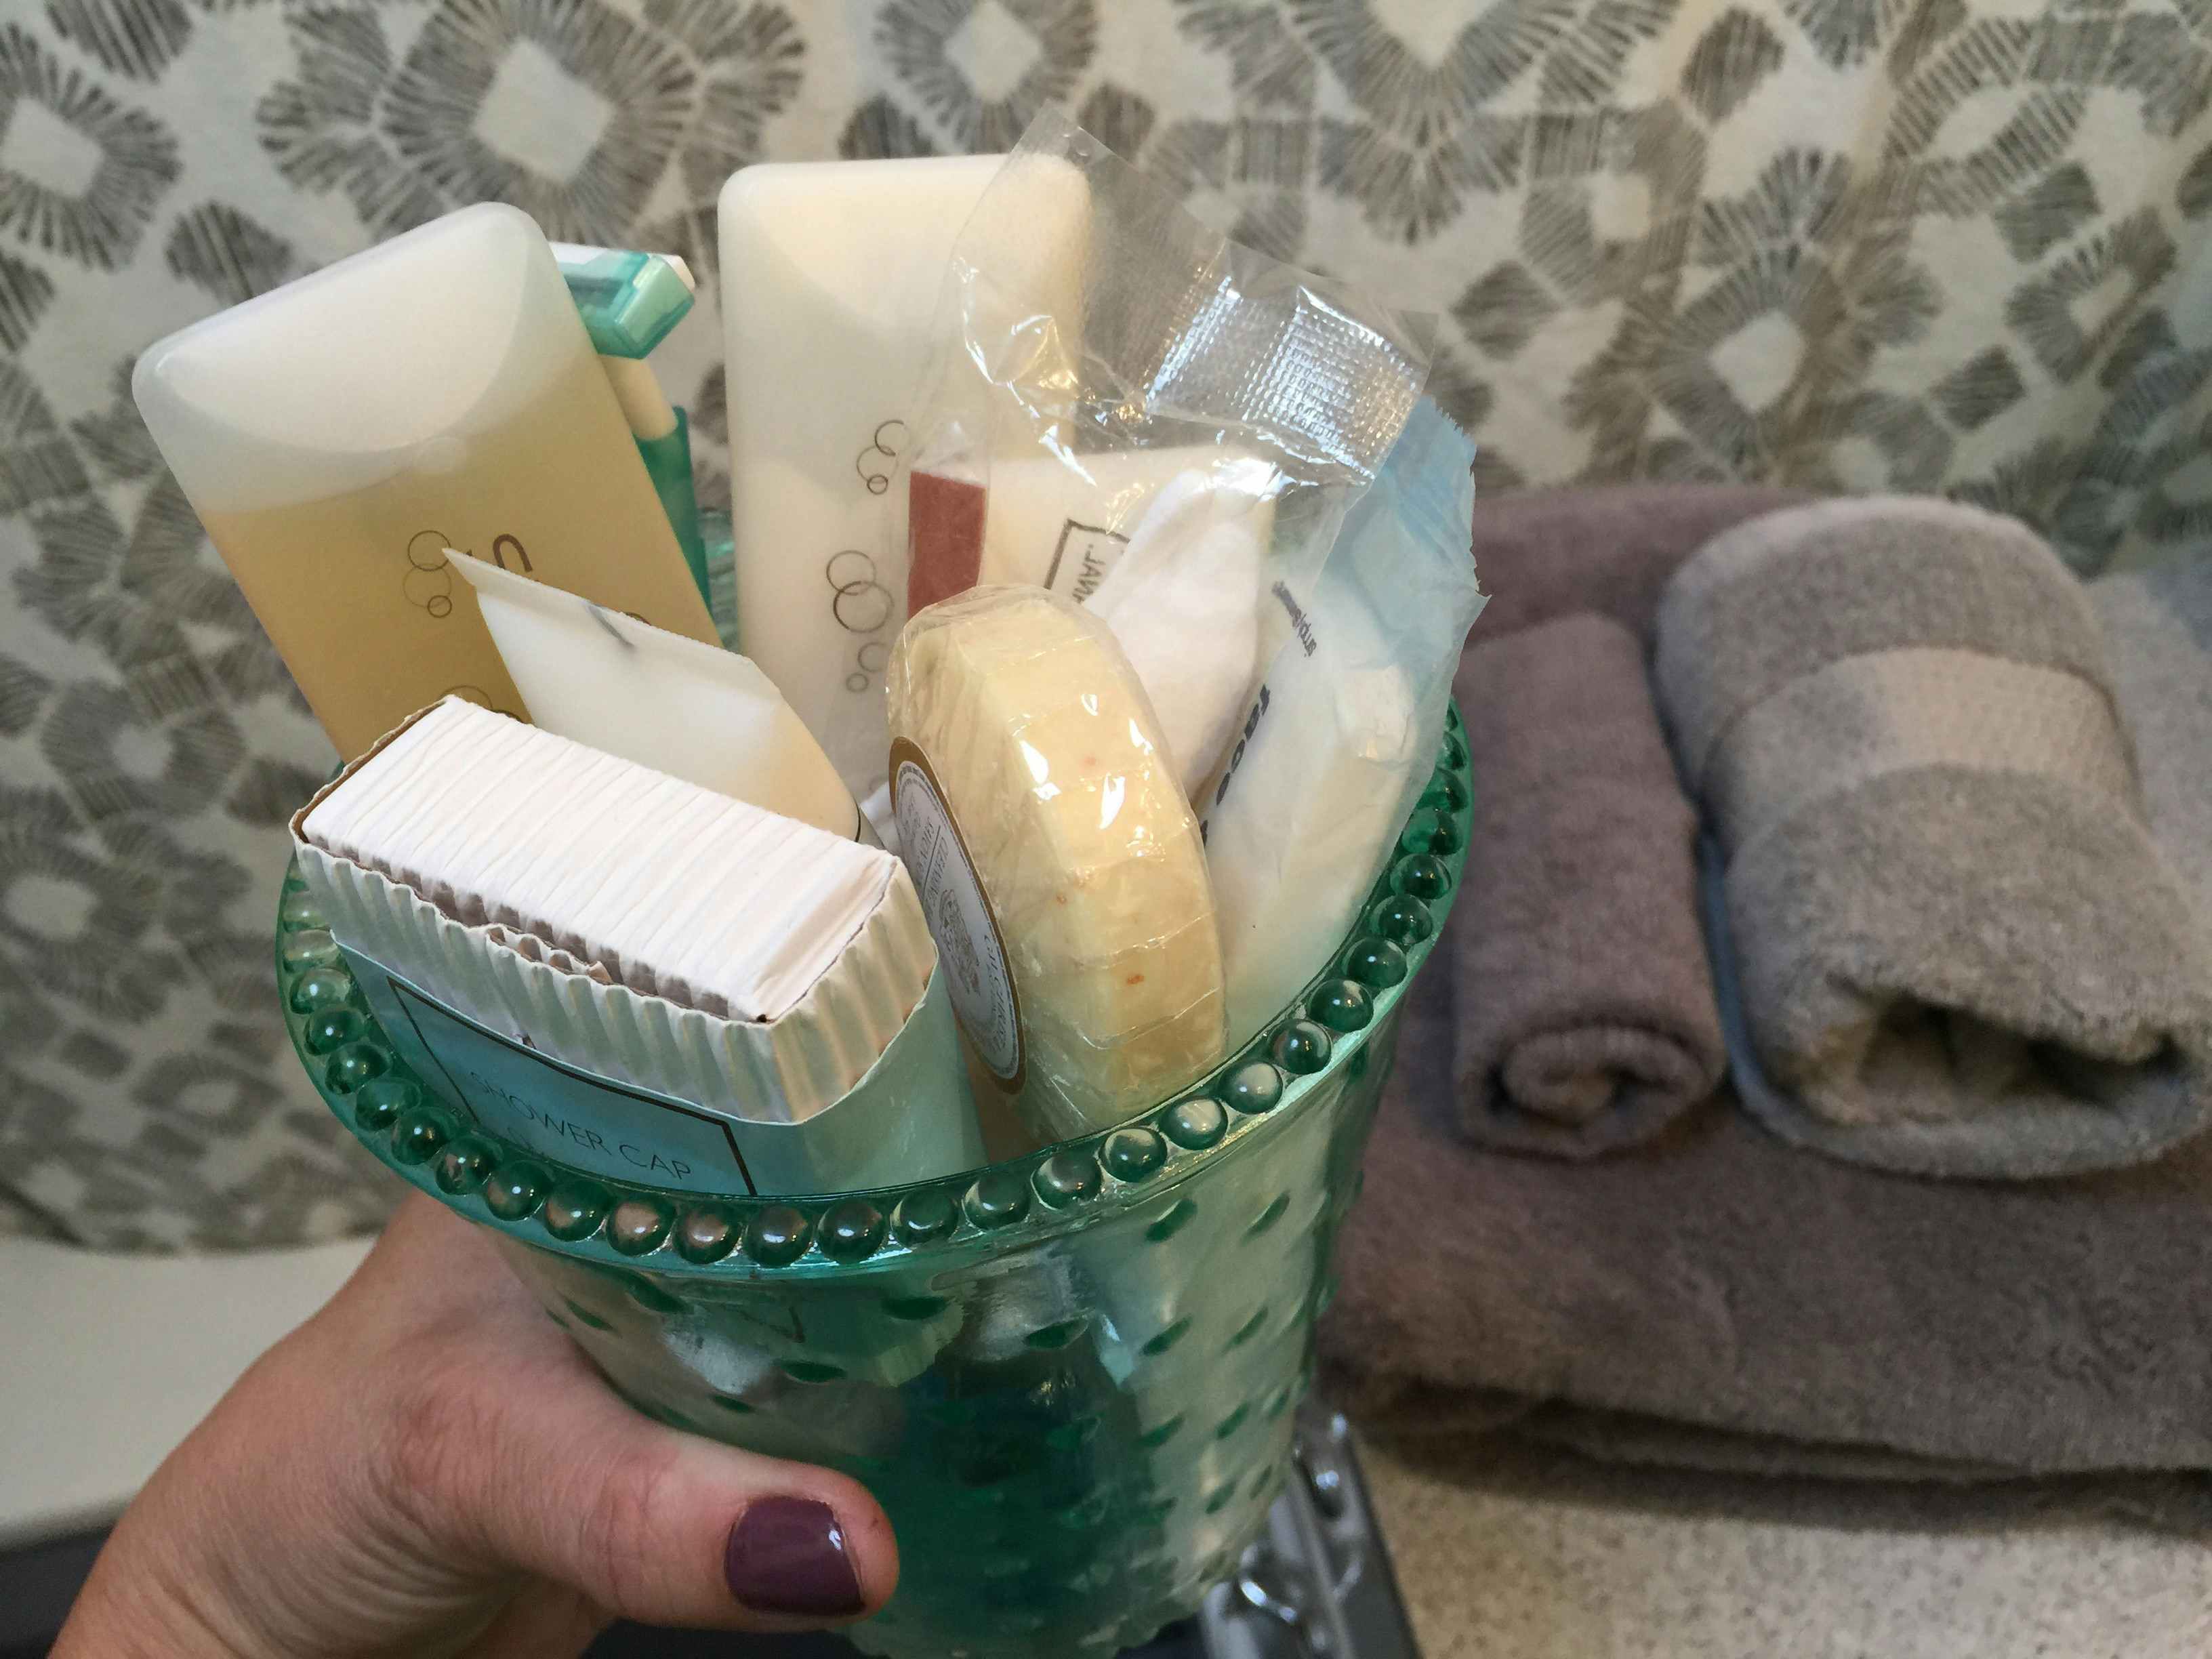 A person holding a vase with soap and other toiletries in it.